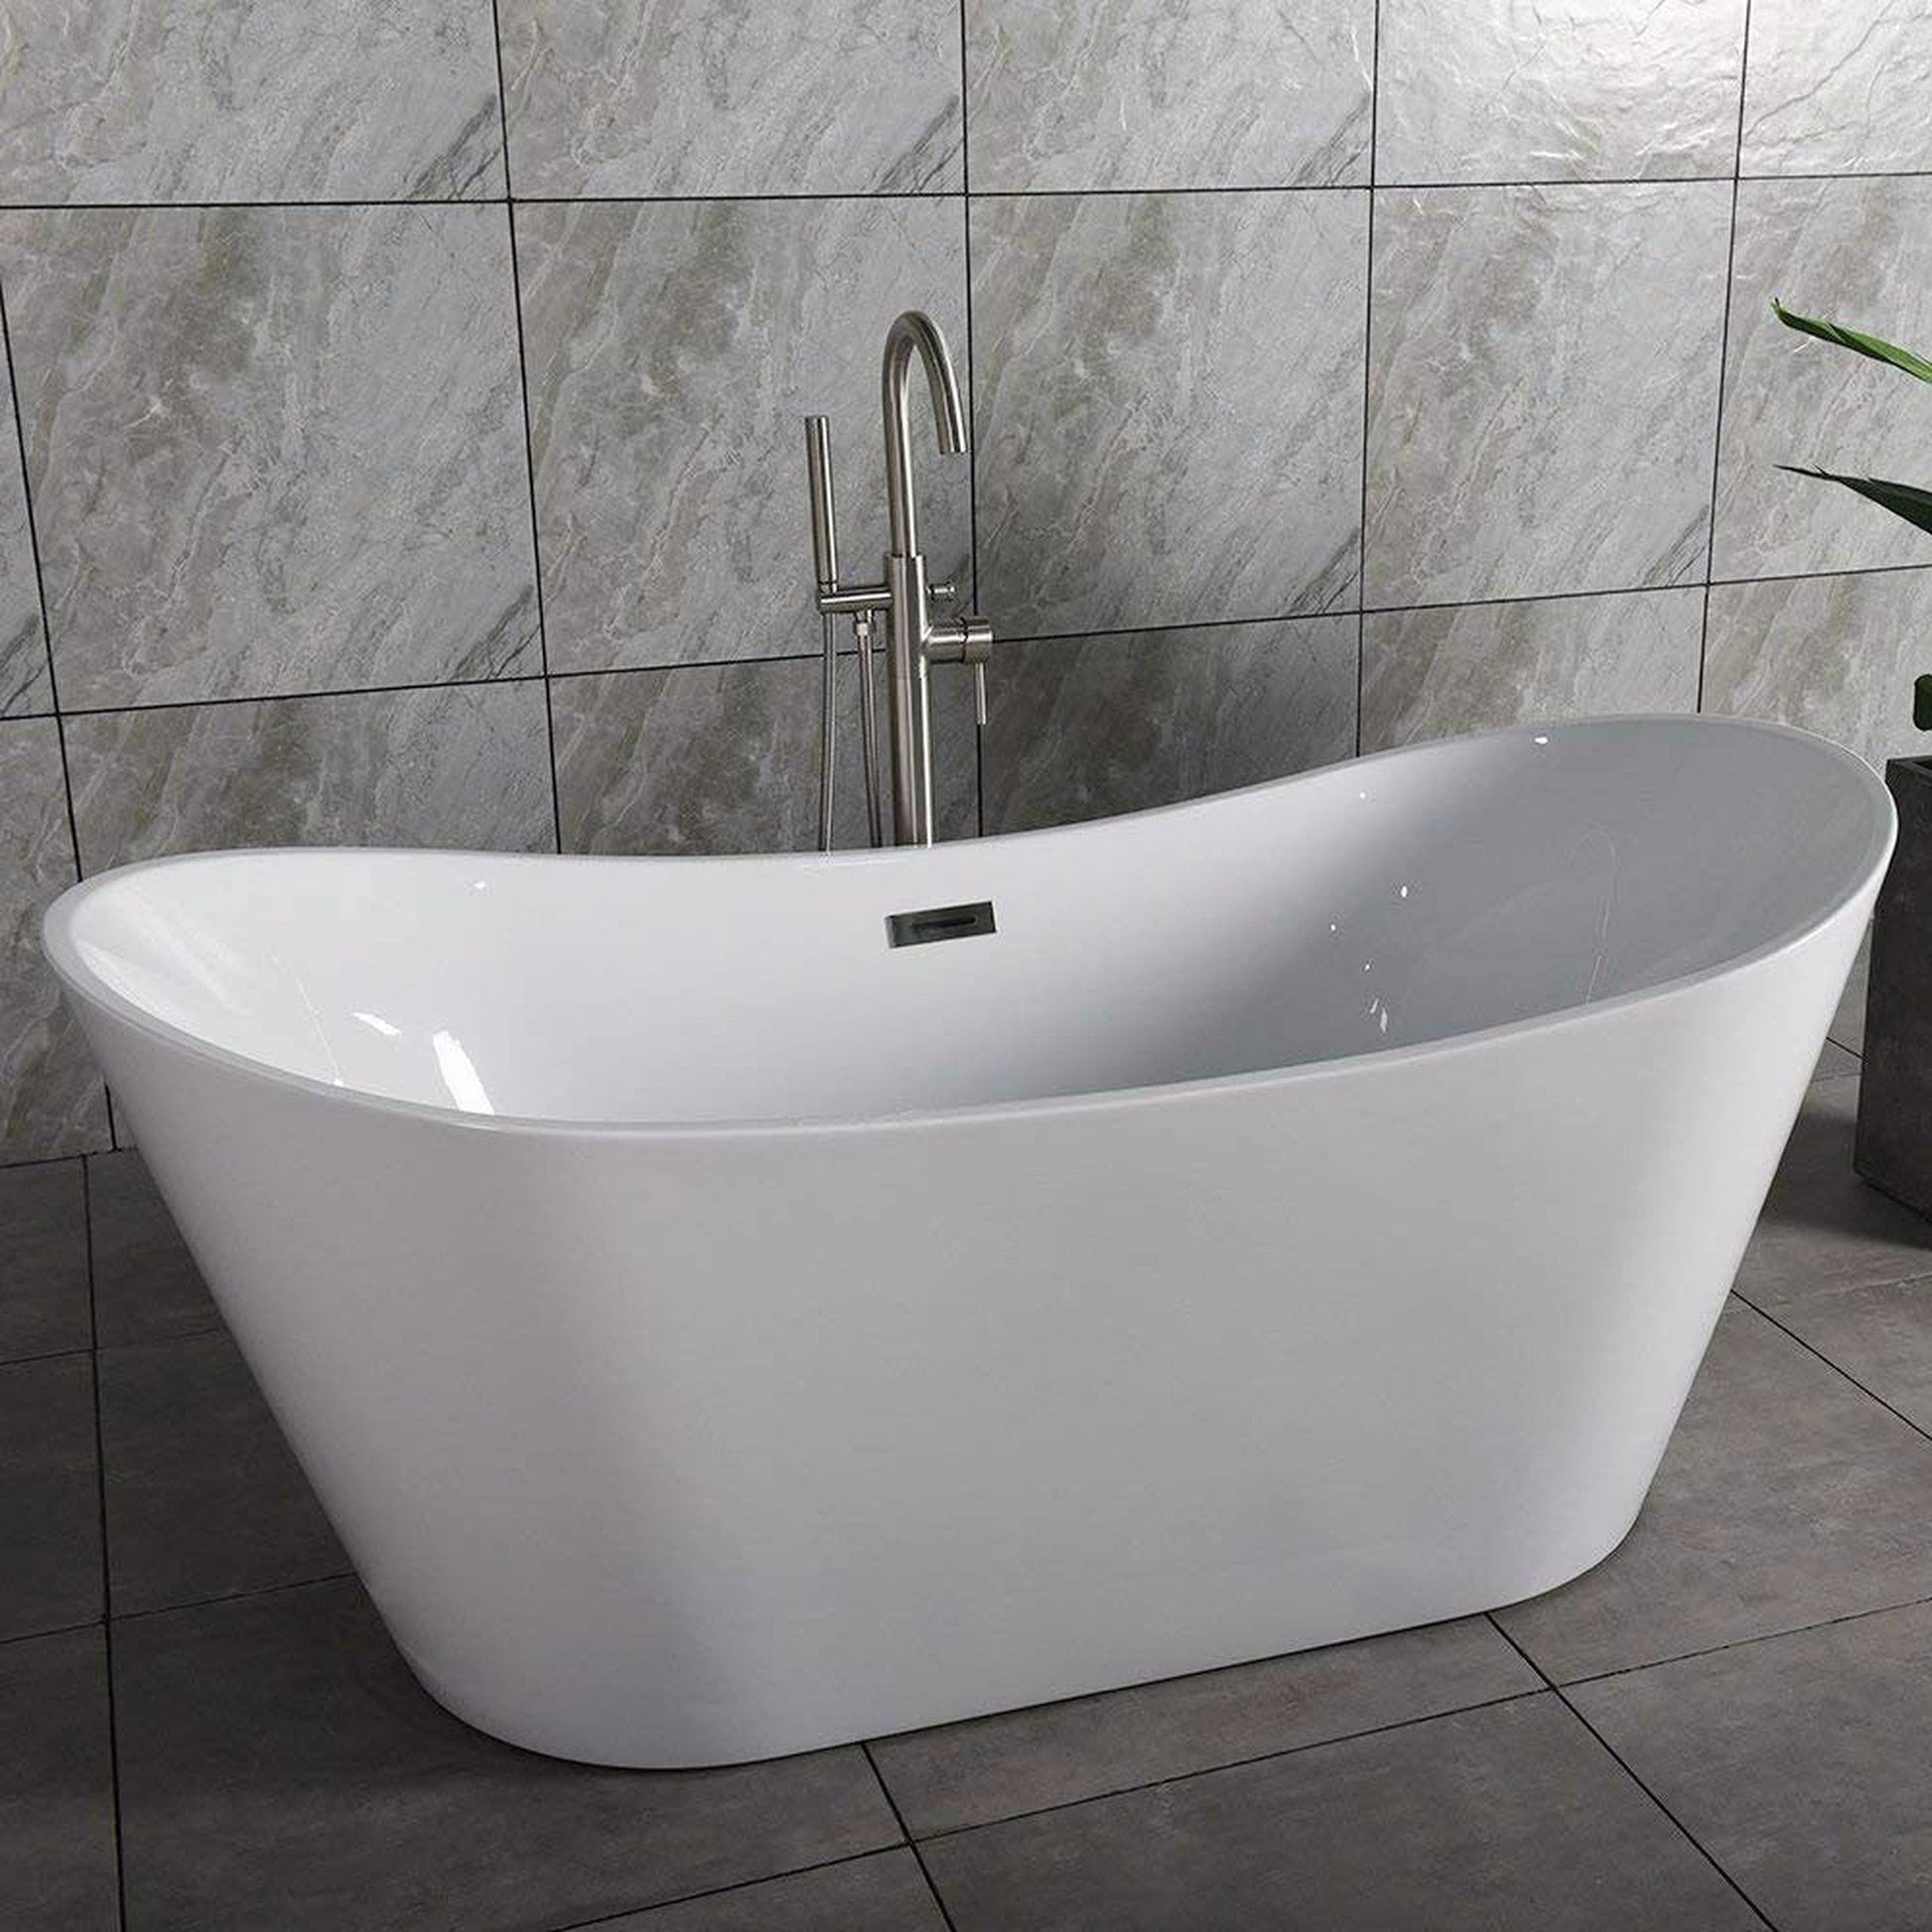 WoodBridge B0010 67" White Acrylic Freestanding Contemporary Soaking Bathtub With Brushed Nickel Drain, Overflow, F0023BNVT Tub Filler and Caddy Tray